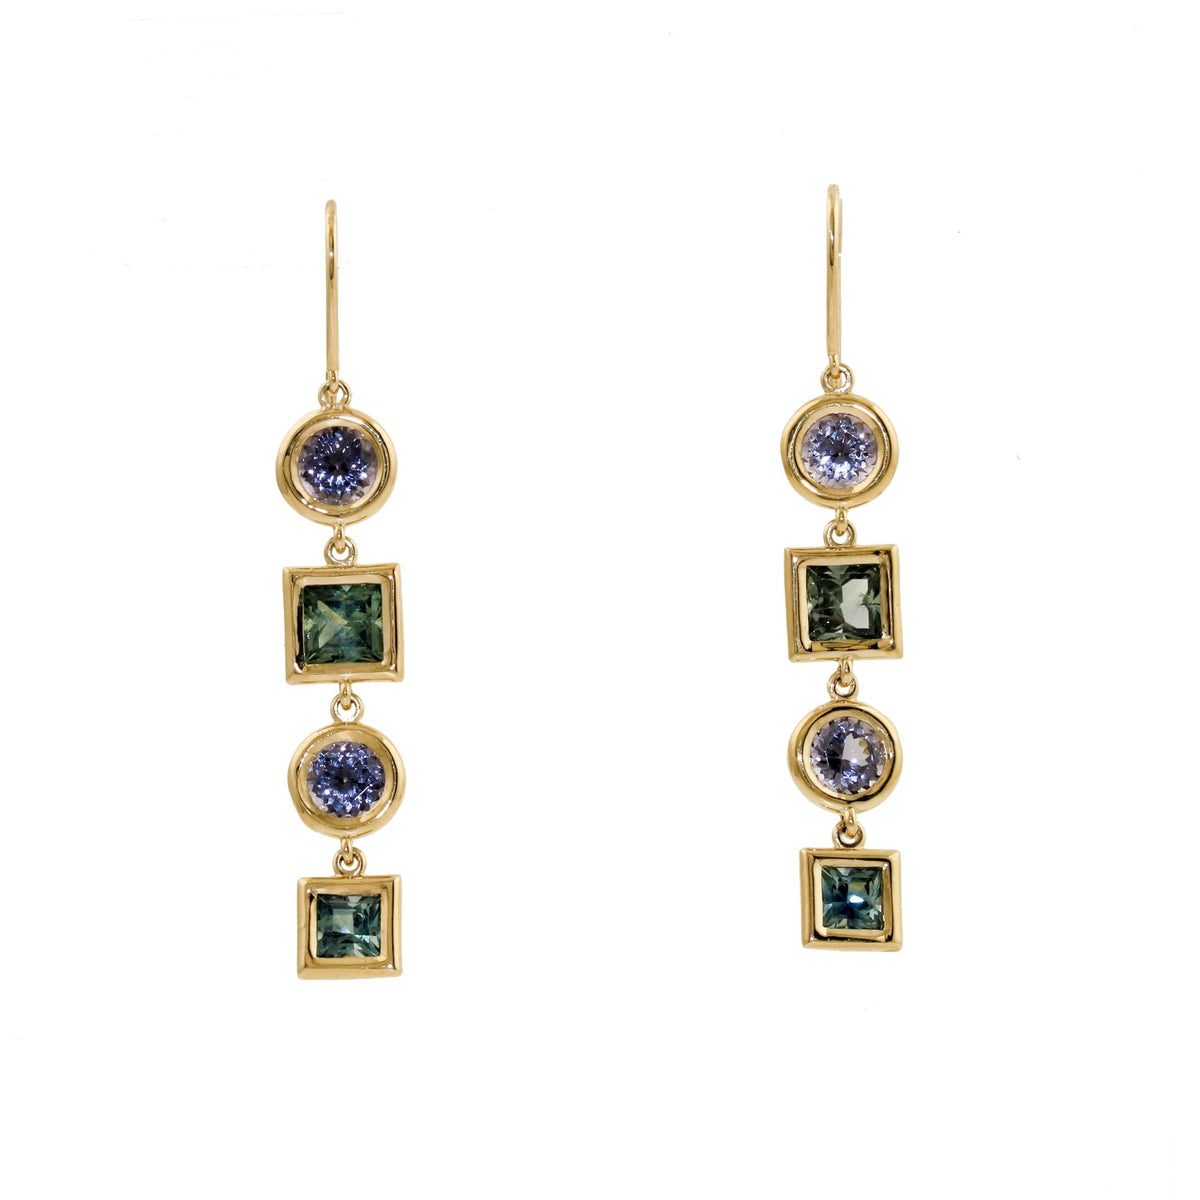 The Camille Sapphire Earrings - Kingdom Jewelry